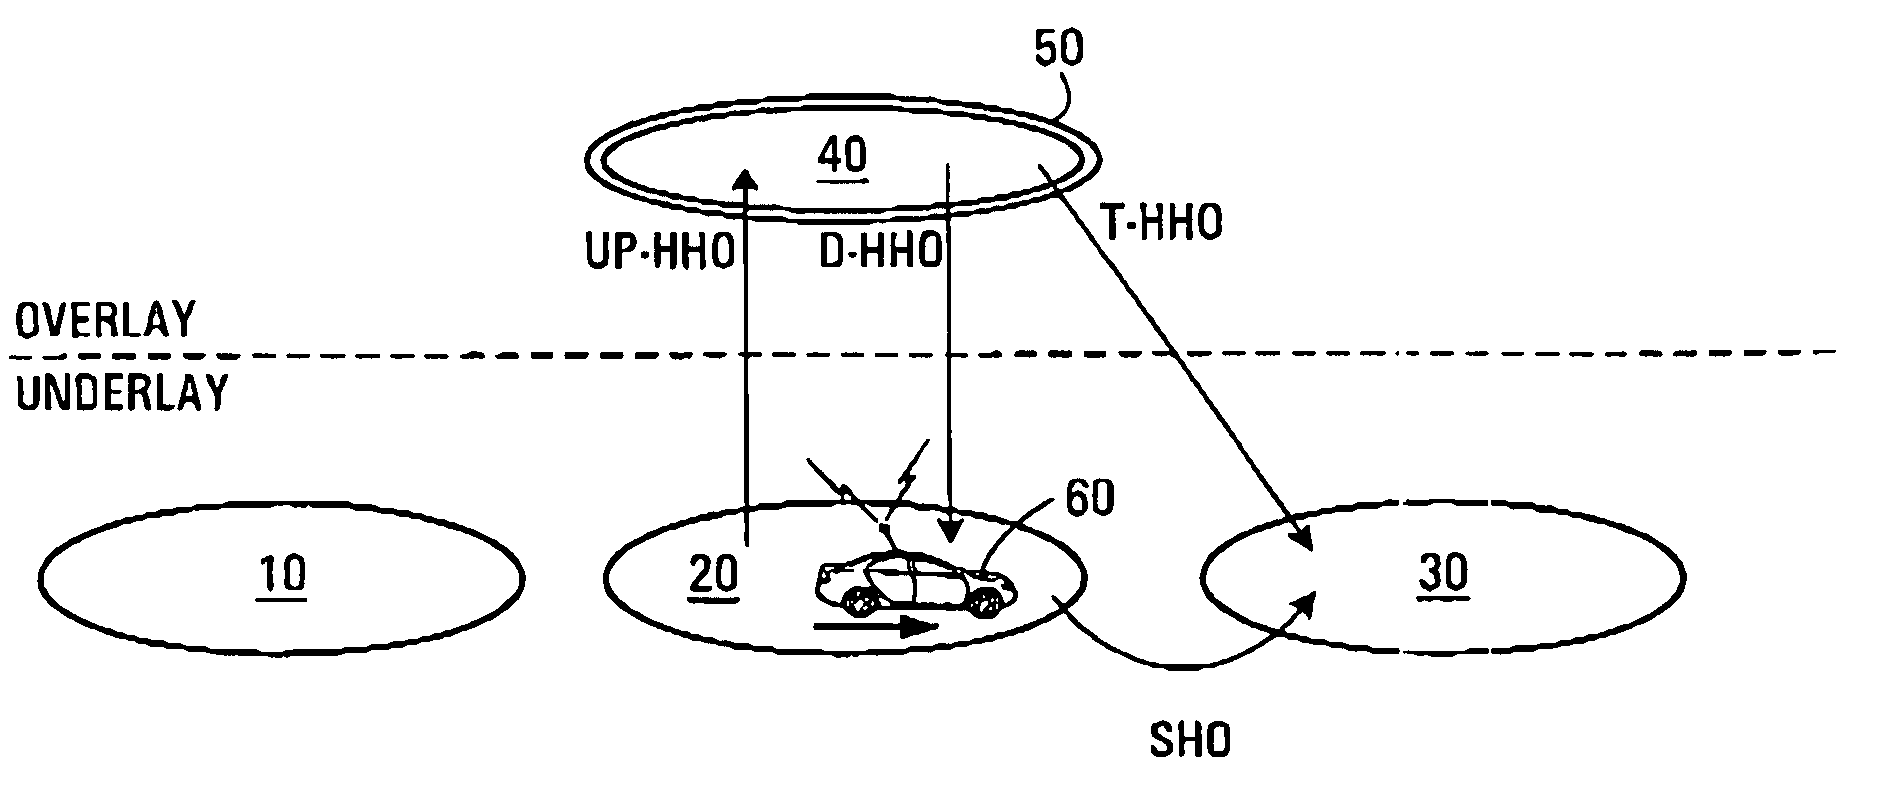 Method and apparatus for transmitting traffic on overlay and underlay carriers